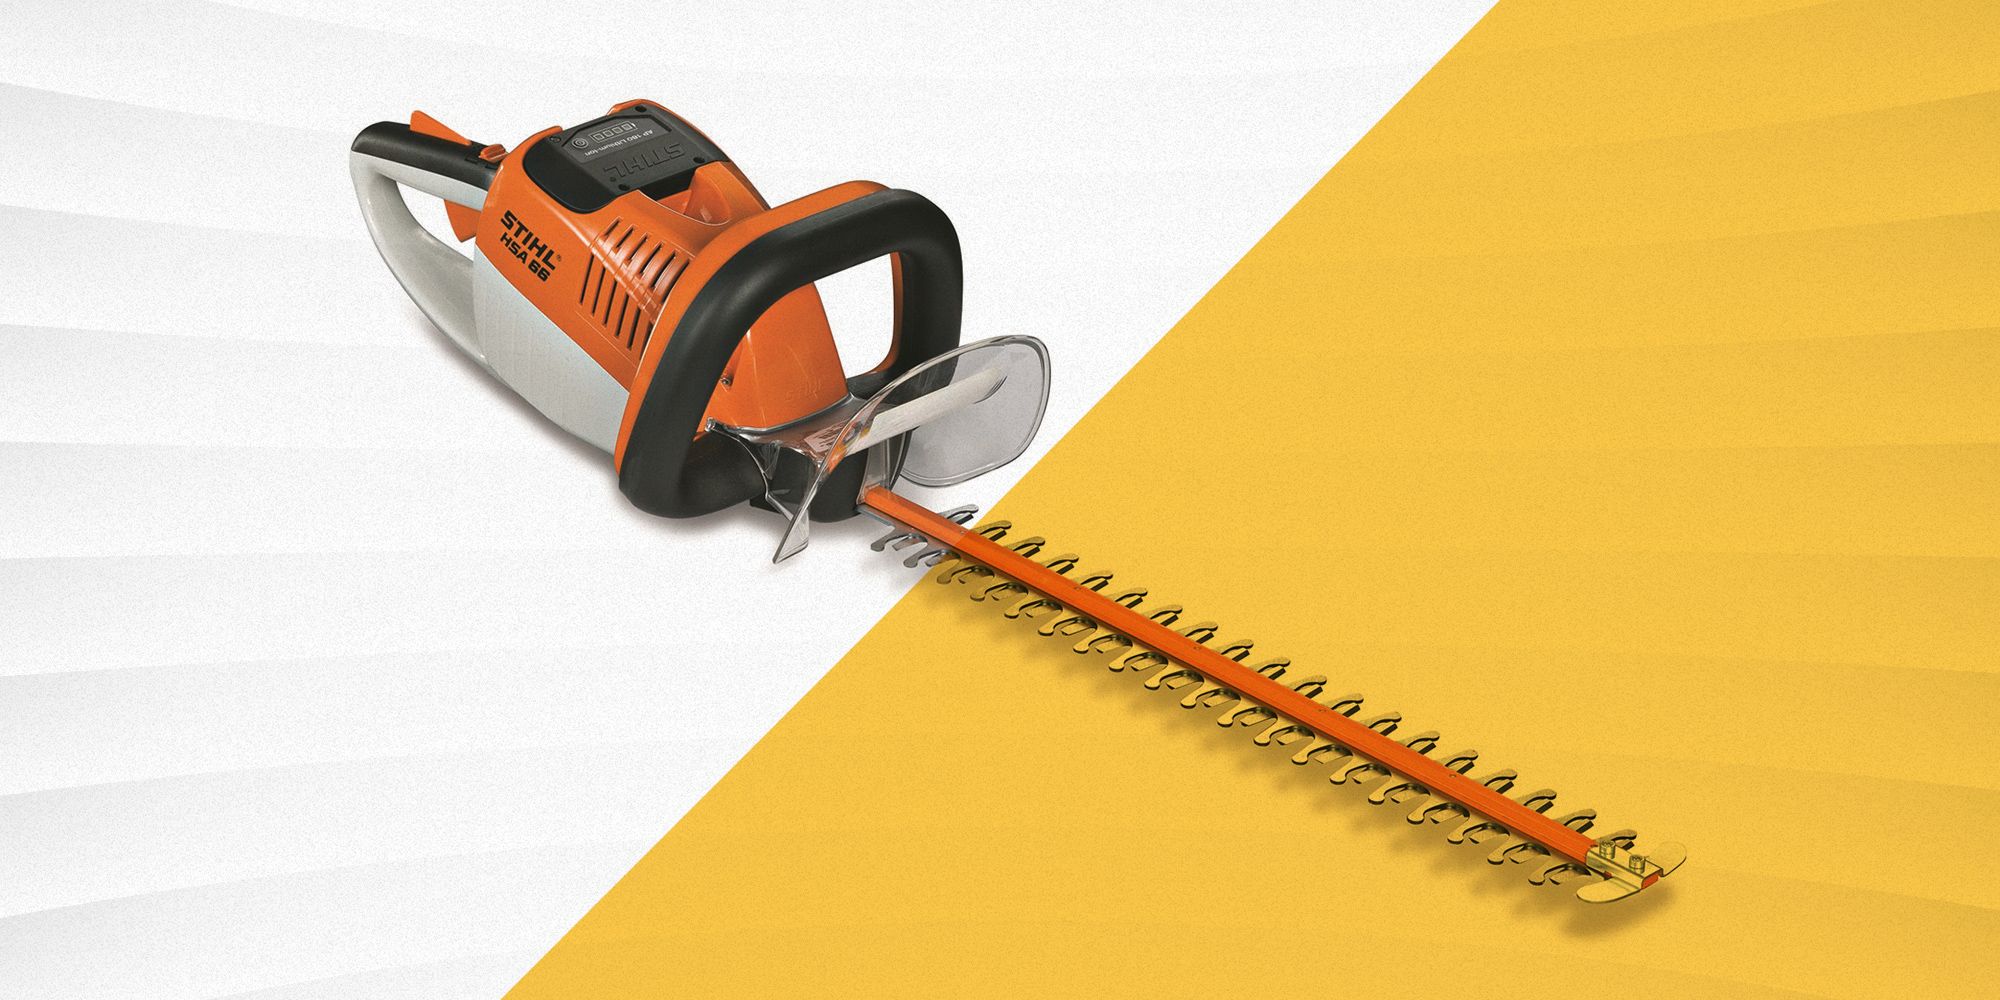 Best Hedge Trimmers 2021 | Reviews